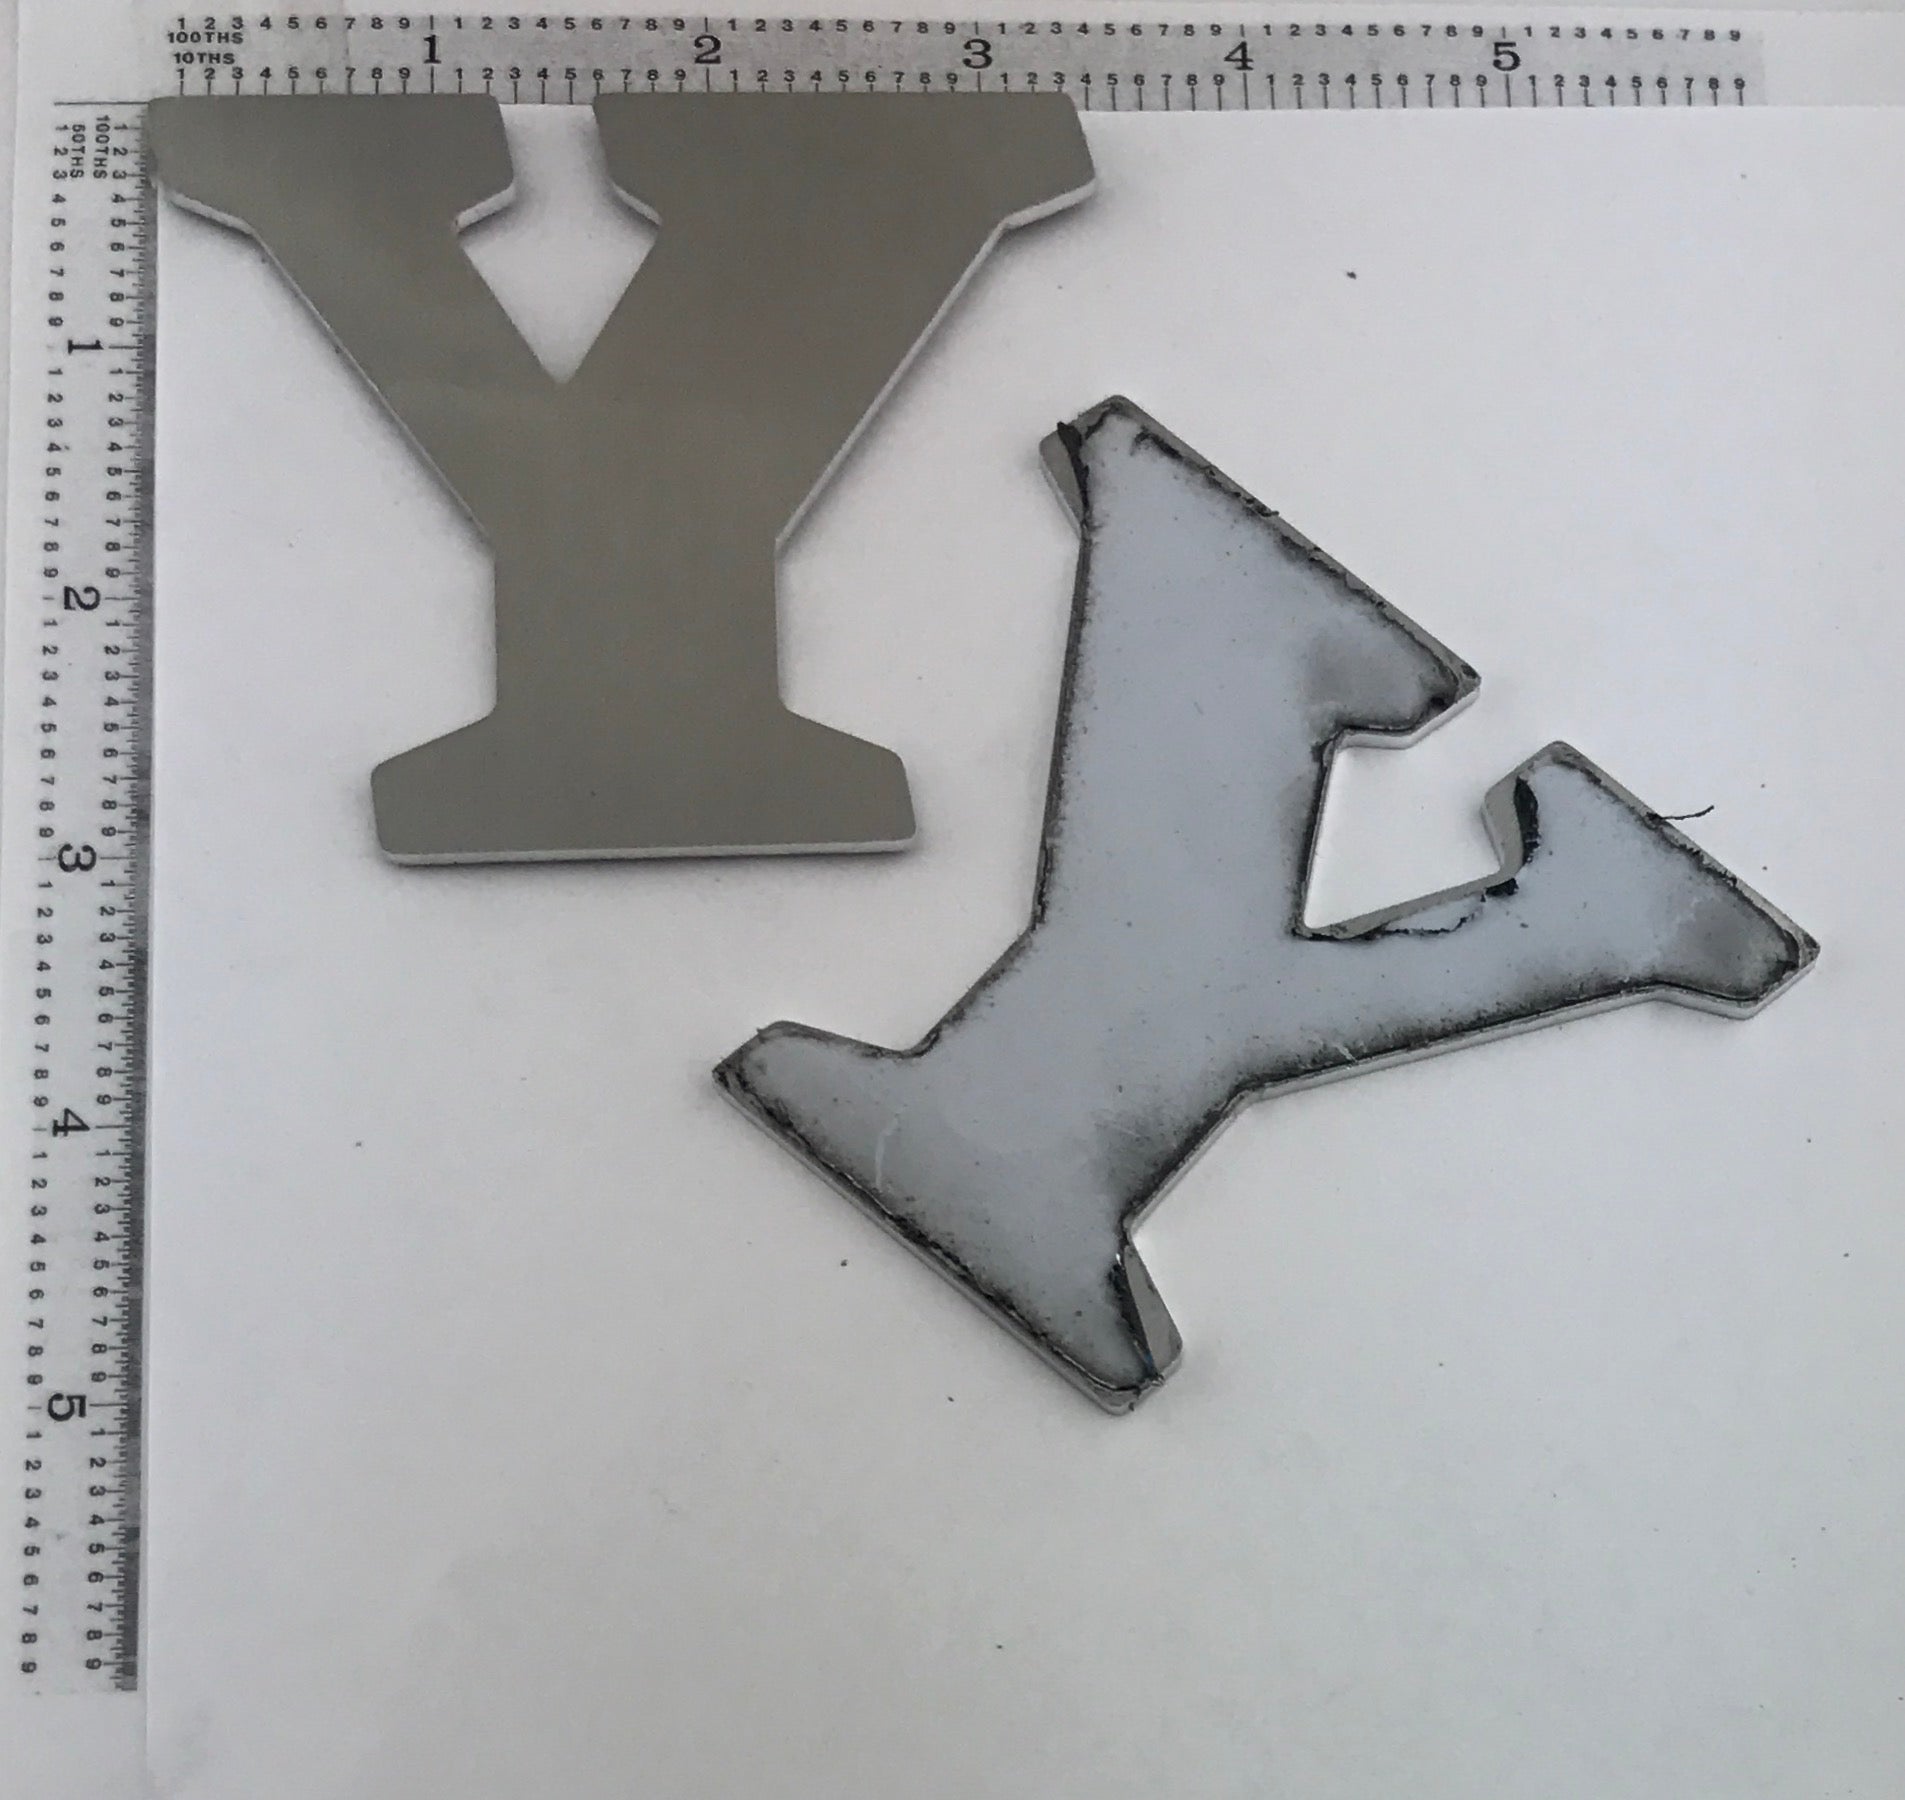 Letter Blanks " Y " - Stamp Yours